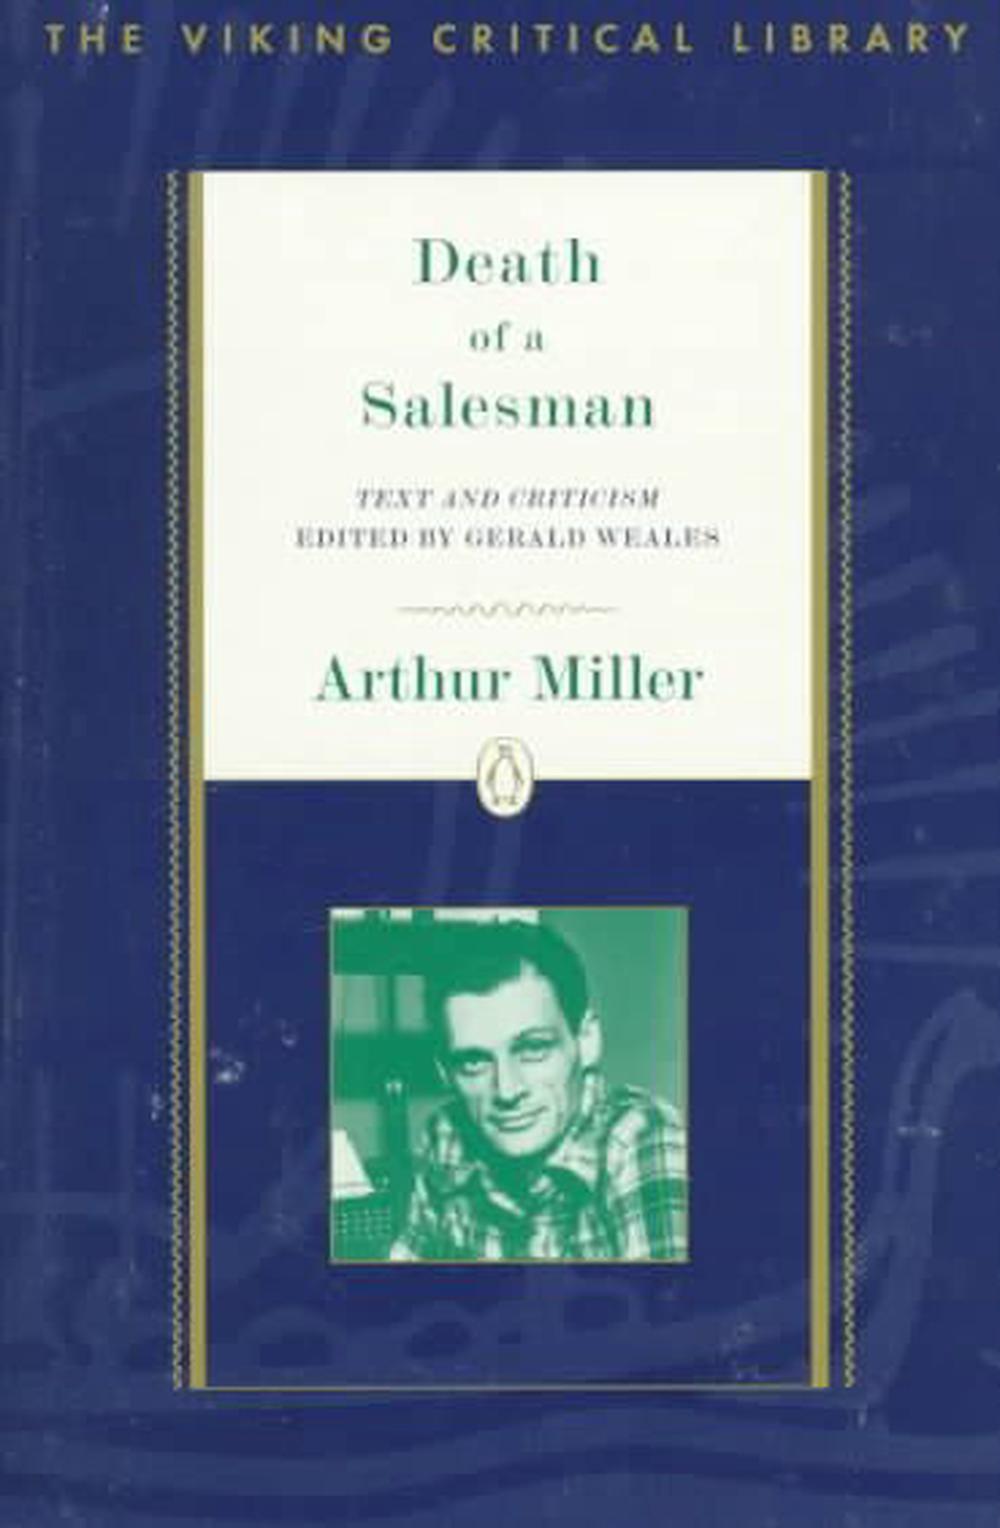 act two death of a salesman script